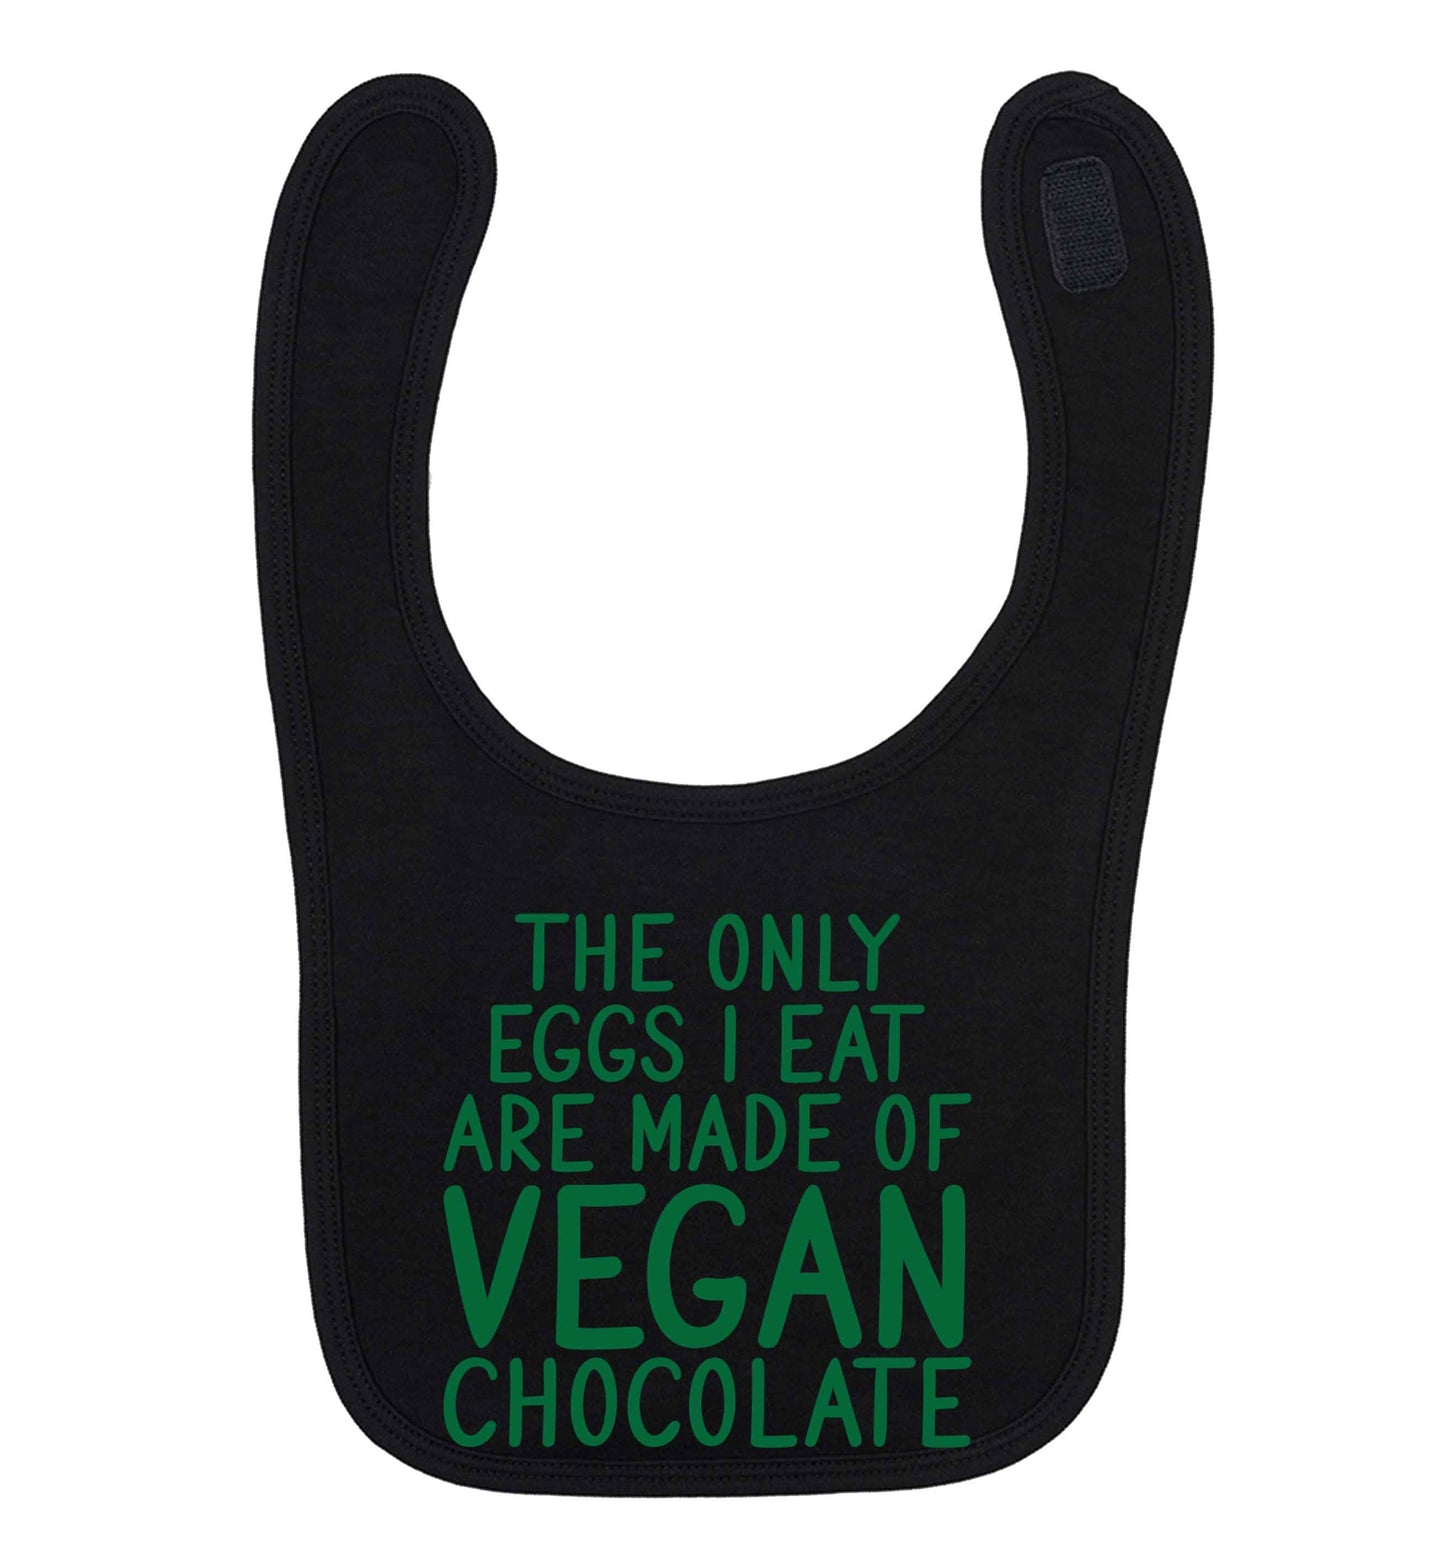 The only eggs I eat are made of vegan chocolate black baby bib